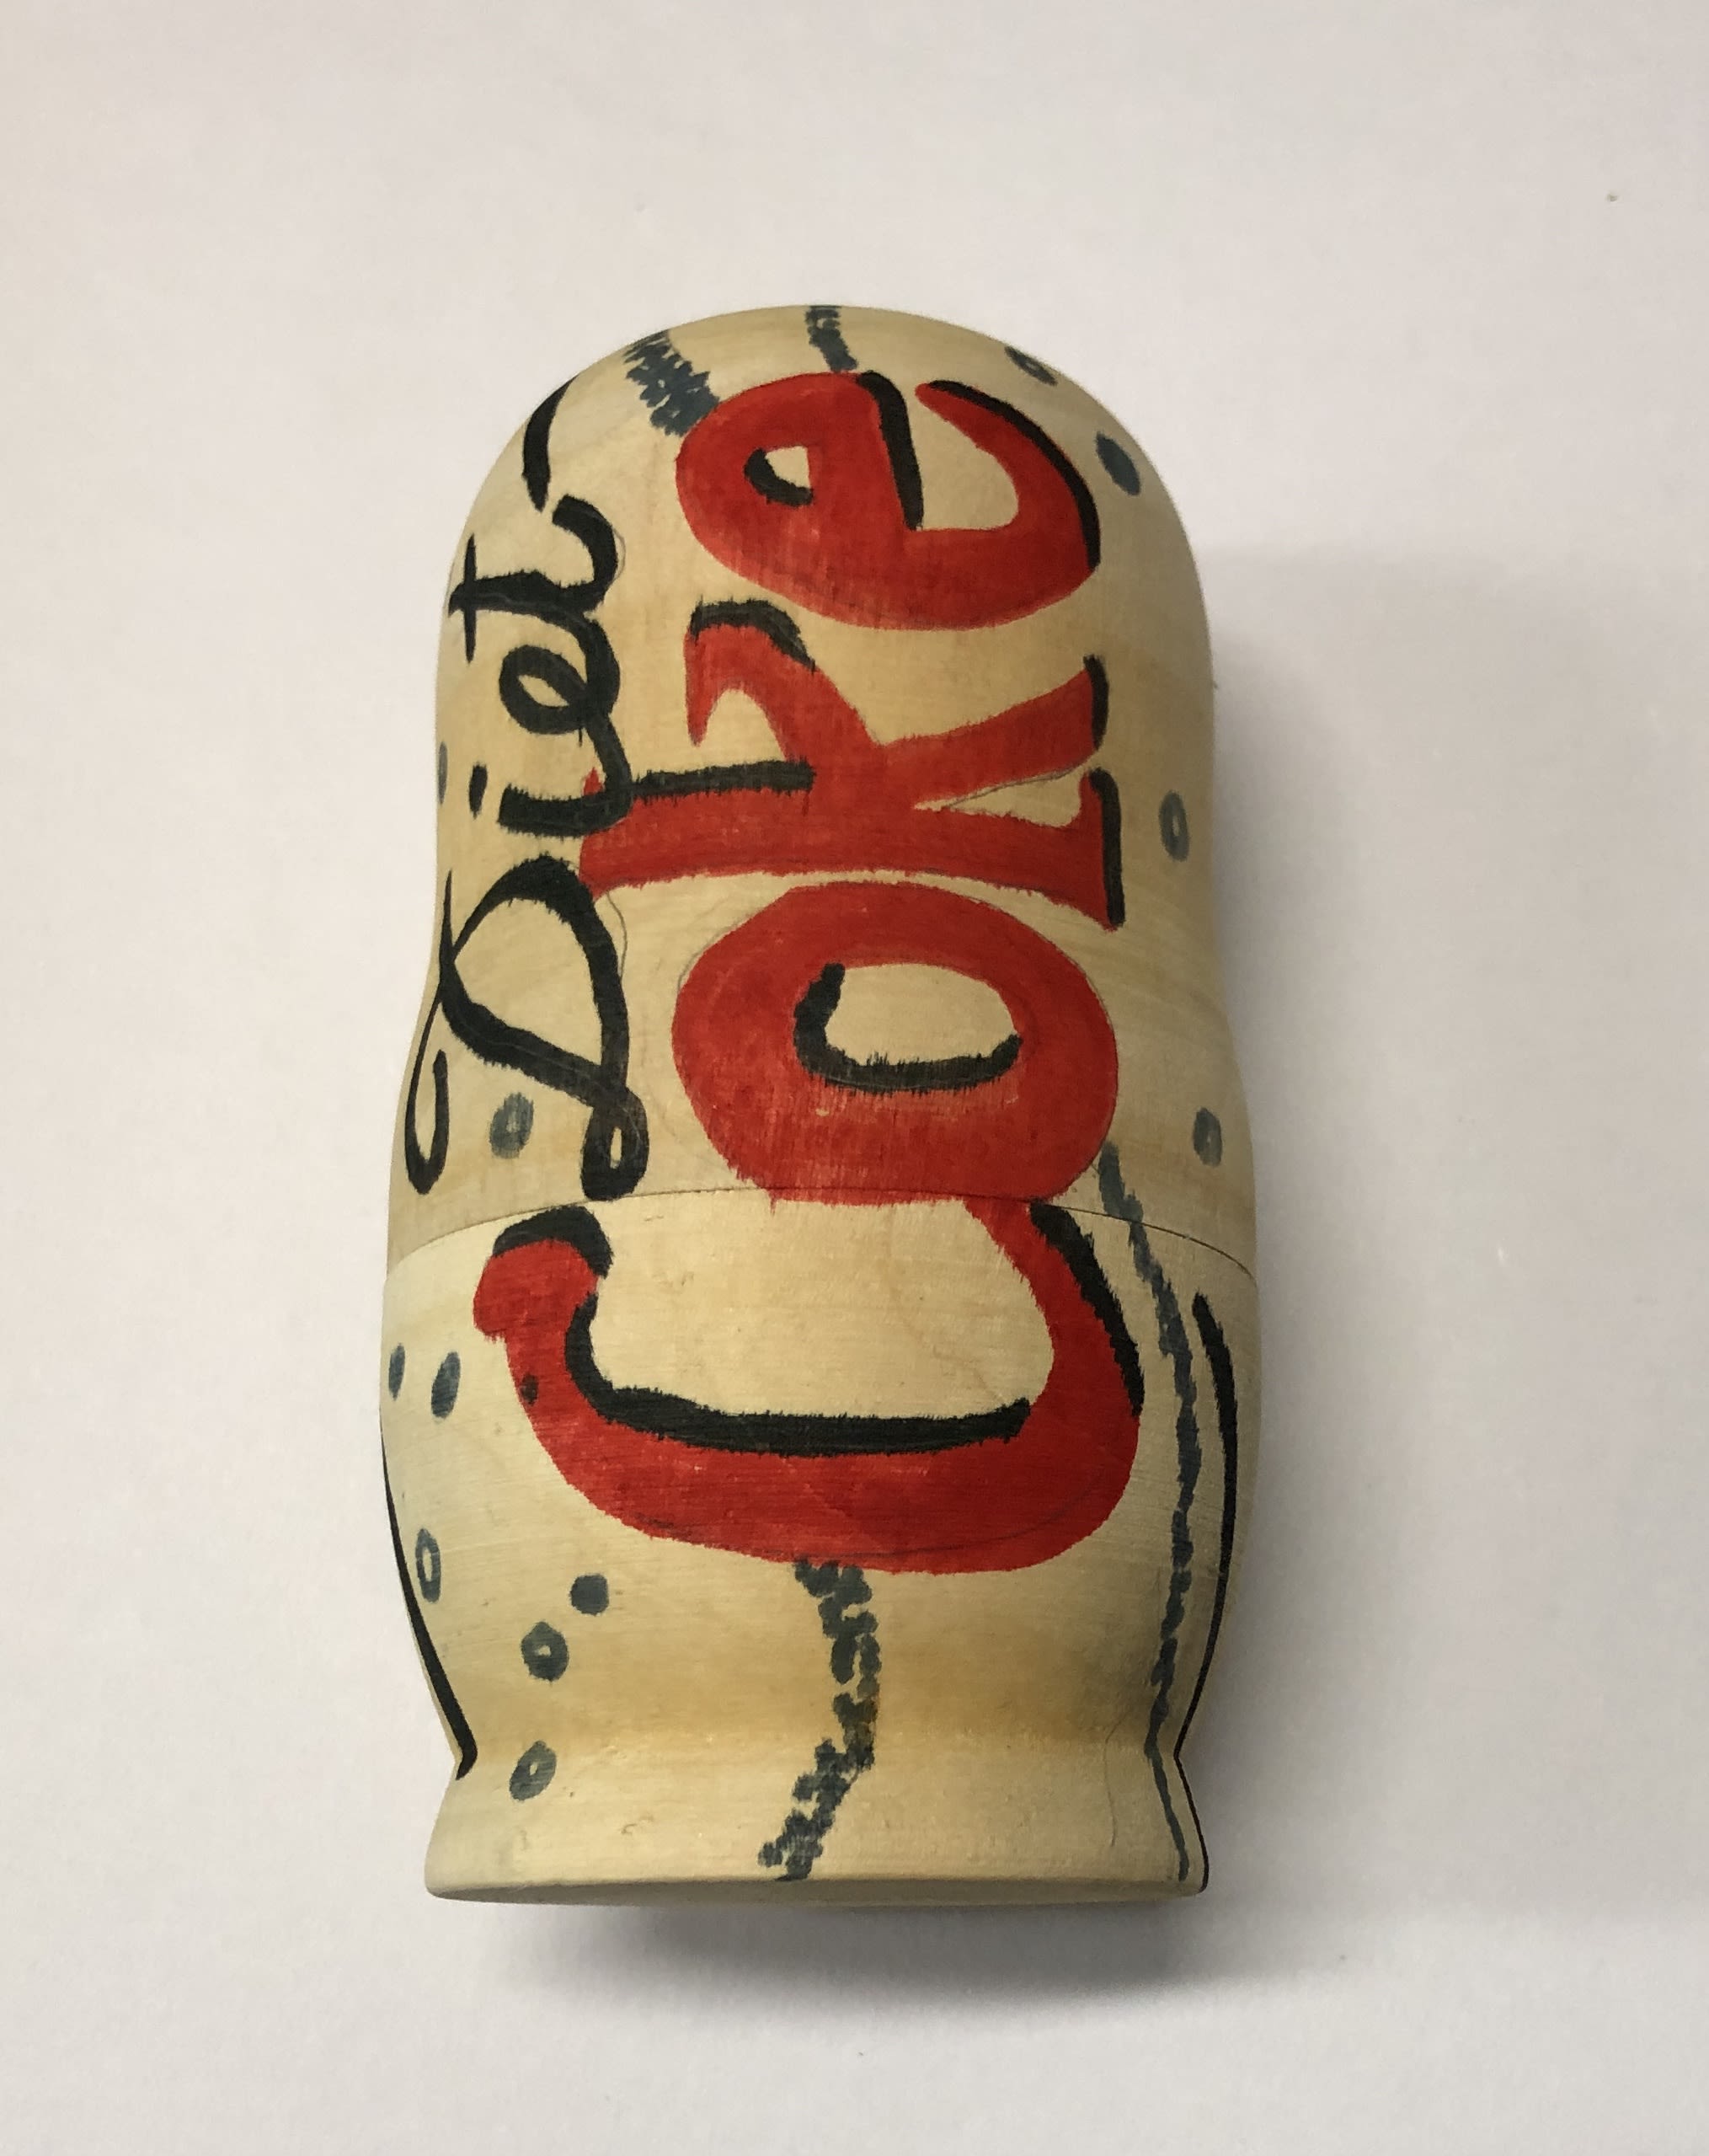 a wooden block painted to look like a diet coke can